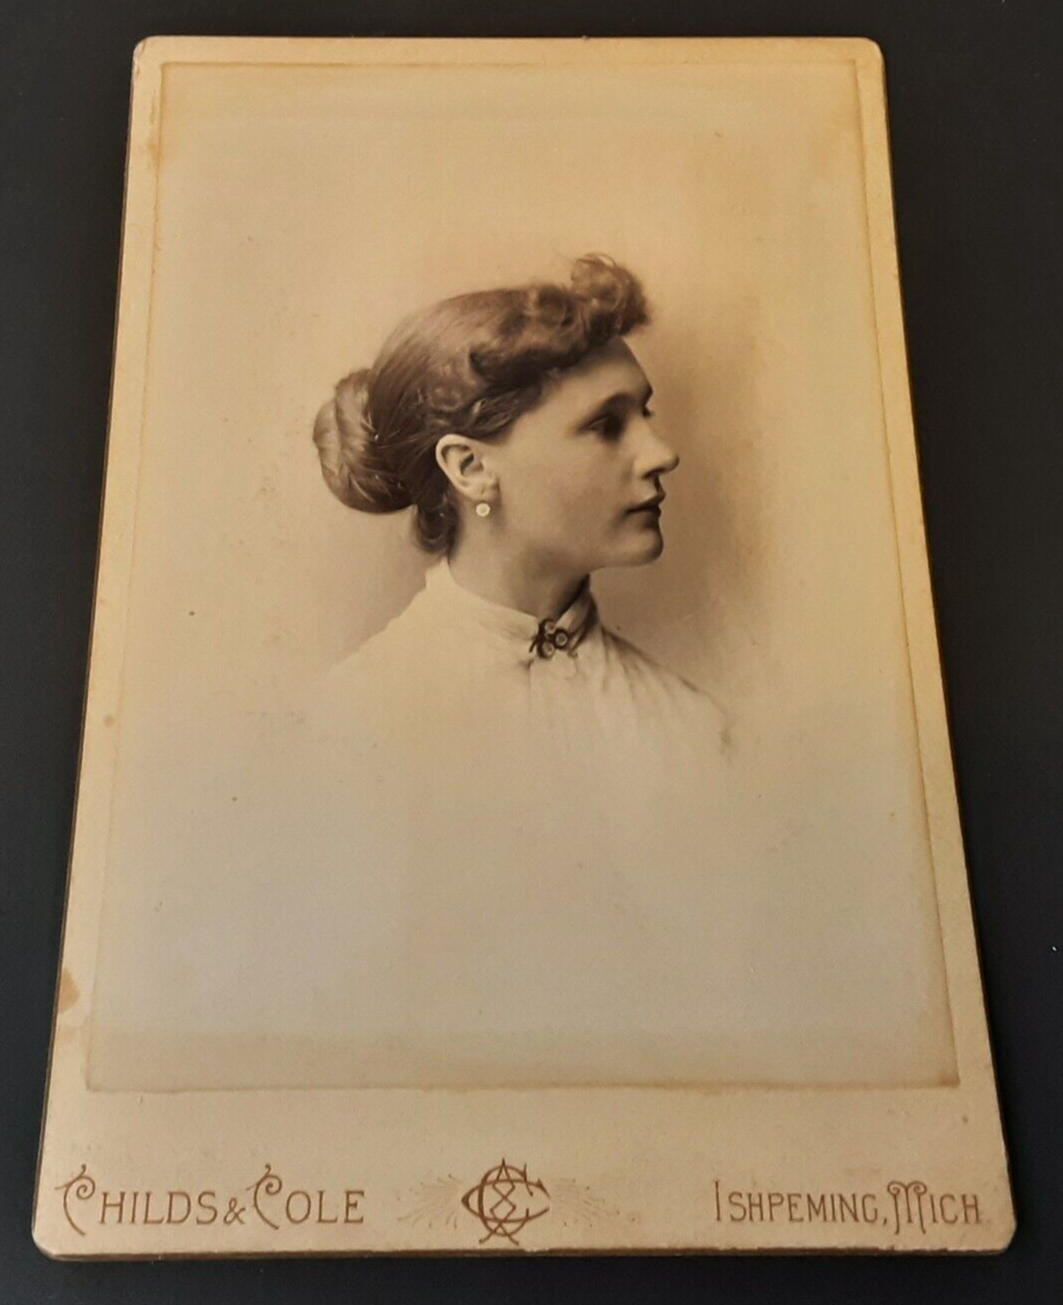 Primary image for CDV Lady Side View Childs Art Gallery Ishpeming Michigan 4.25 x 6.5